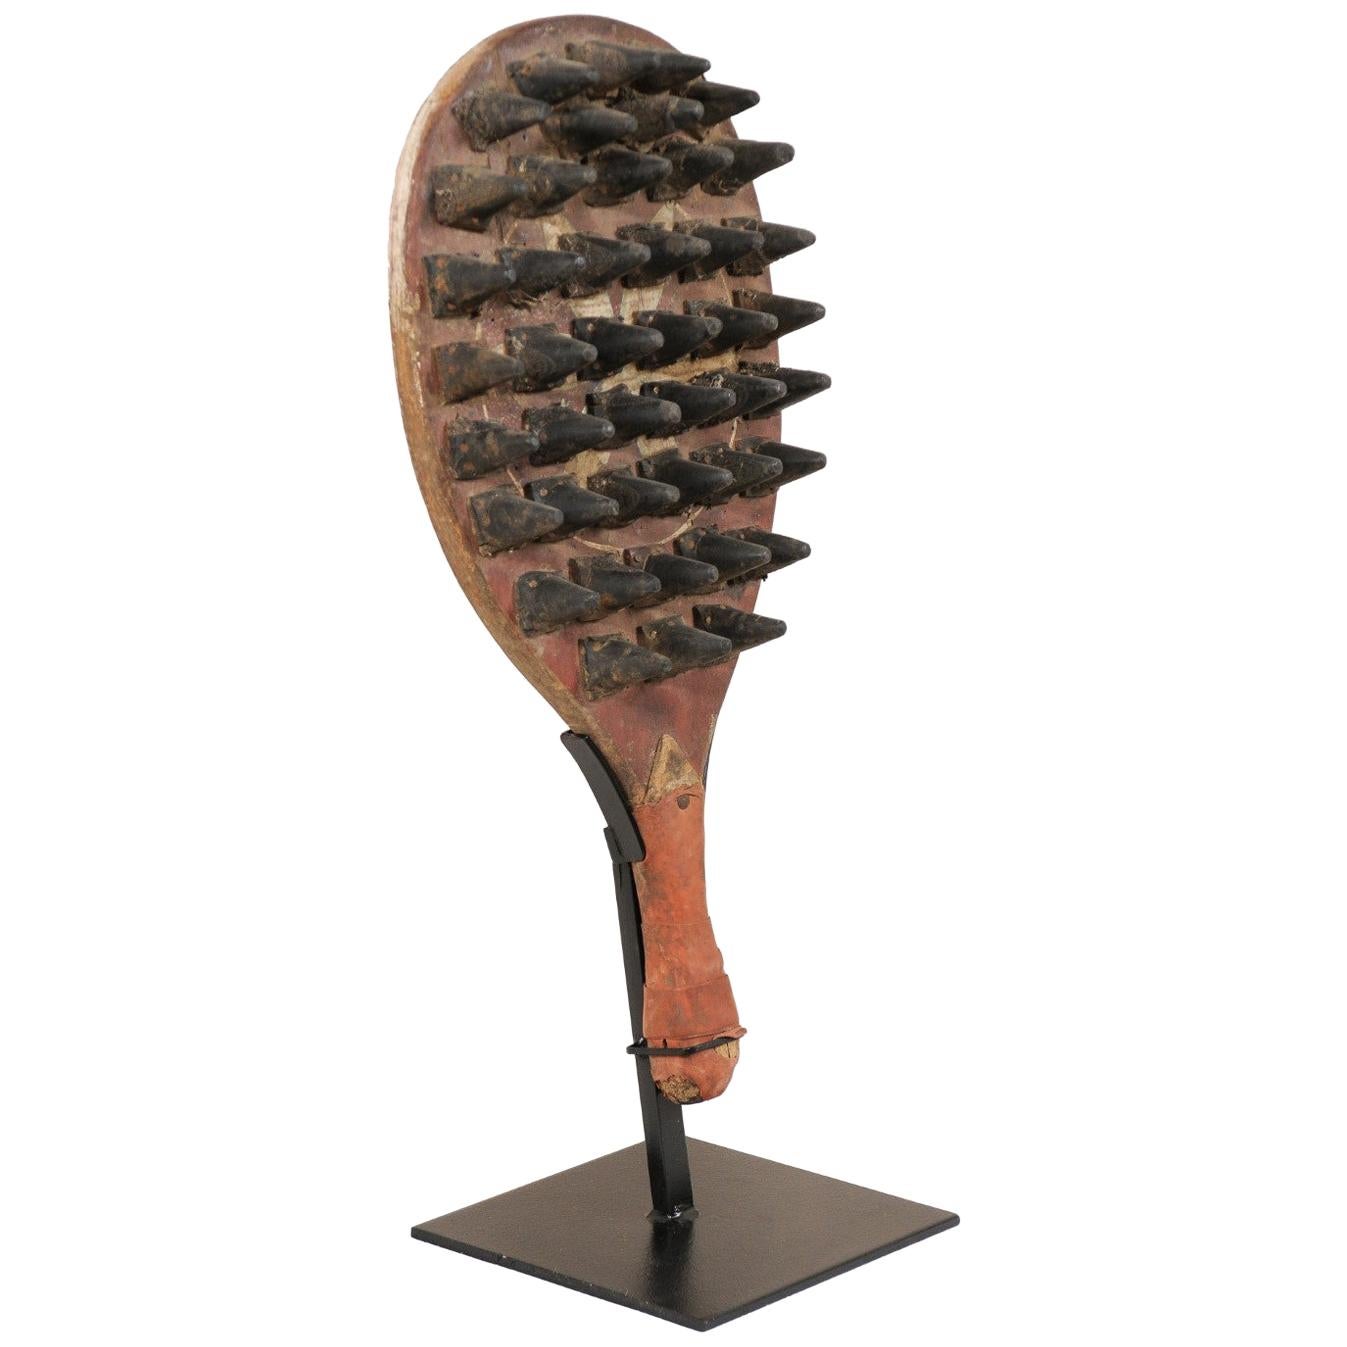 Midcentury Spiked Game Paddle on Stand from India